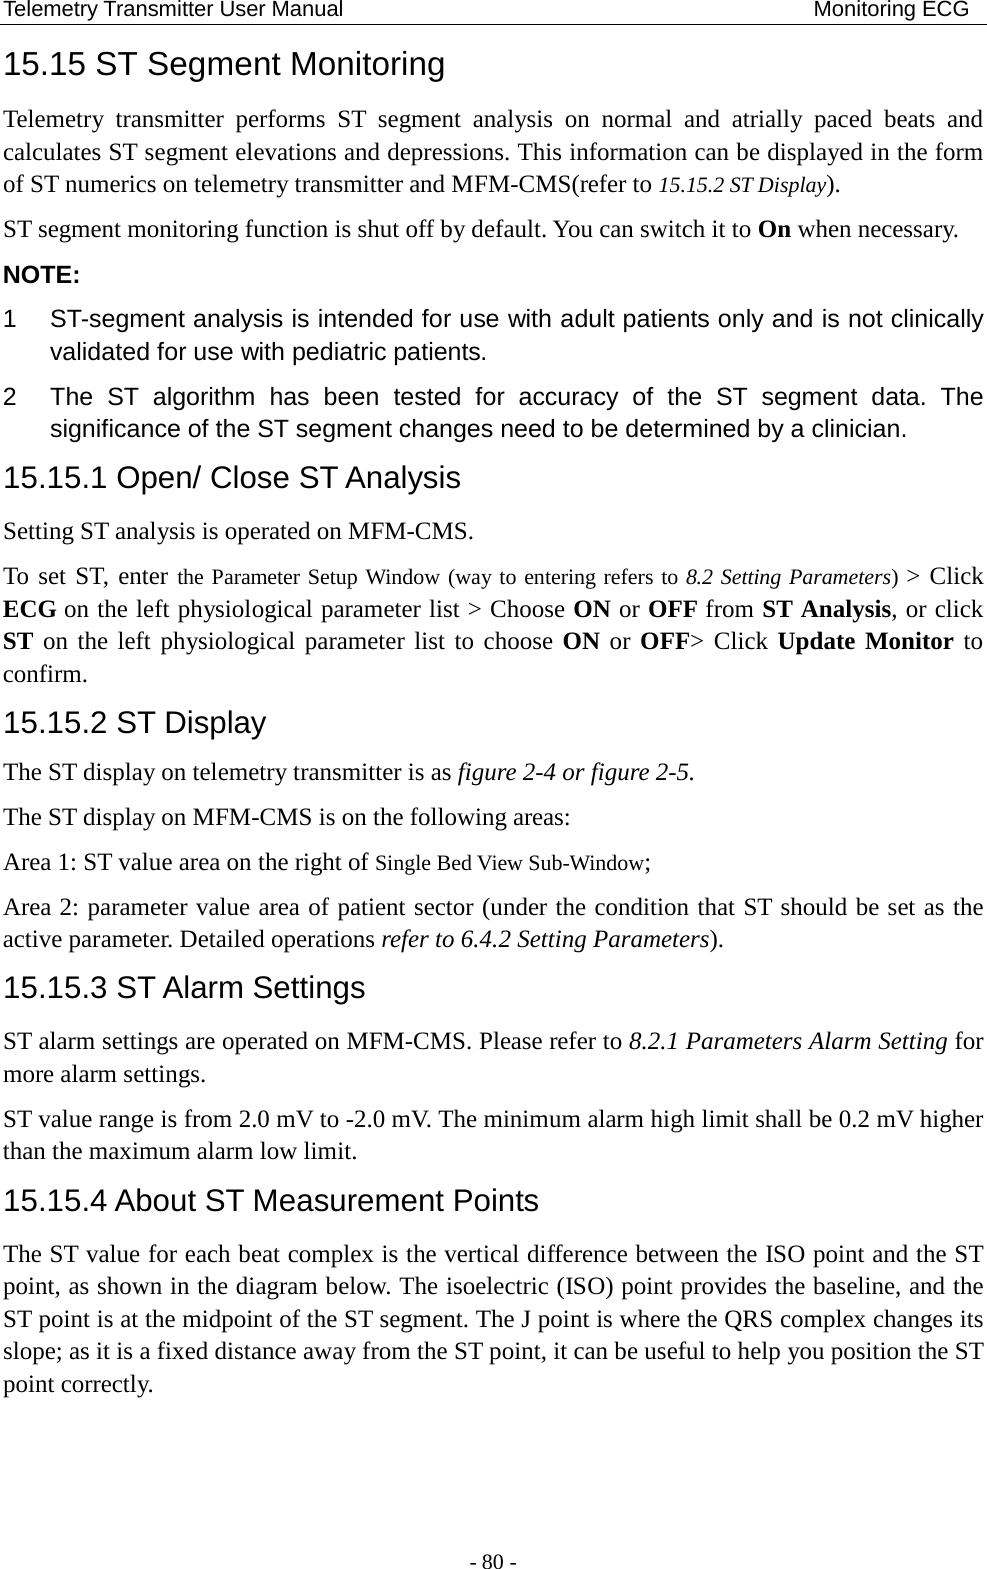 Telemetry Transmitter User Manual                                           Monitoring ECG 15.15 ST Segment Monitoring   Telemetry transmitter performs ST segment analysis on normal and atrially paced beats and calculates ST segment elevations and depressions. This information can be displayed in the form of ST numerics on telemetry transmitter and MFM-CMS(refer to 15.15.2 ST Display). ST segment monitoring function is shut off by default. You can switch it to On when necessary.   NOTE: 1  ST-segment analysis is intended for use with adult patients only and is not clinically validated for use with pediatric patients. 2  The ST algorithm has been tested for accuracy of the ST segment data. The significance of the ST segment changes need to be determined by a clinician. 15.15.1 Open/ Close ST Analysis Setting ST analysis is operated on MFM-CMS.   To set ST, enter the Parameter Setup Window (way to entering refers to 8.2 Setting Parameters) &gt; Click ECG on the left physiological parameter list &gt; Choose ON or OFF from ST Analysis, or click ST on the left physiological parameter list to choose ON or OFF&gt; Click Update Monitor to confirm. 15.15.2 ST Display The ST display on telemetry transmitter is as figure 2-4 or figure 2-5. The ST display on MFM-CMS is on the following areas: Area 1: ST value area on the right of Single Bed View Sub-Window;   Area 2: parameter value area of patient sector (under the condition that ST should be set as the active parameter. Detailed operations refer to 6.4.2 Setting Parameters). 15.15.3 ST Alarm Settings ST alarm settings are operated on MFM-CMS. Please refer to 8.2.1 Parameters Alarm Setting for more alarm settings. ST value range is from 2.0 mV to -2.0 mV. The minimum alarm high limit shall be 0.2 mV higher than the maximum alarm low limit. 15.15.4 About ST Measurement Points The ST value for each beat complex is the vertical difference between the ISO point and the ST point, as shown in the diagram below. The isoelectric (ISO) point provides the baseline, and the ST point is at the midpoint of the ST segment. The J point is where the QRS complex changes its slope; as it is a fixed distance away from the ST point, it can be useful to help you position the ST point correctly. - 80 - 